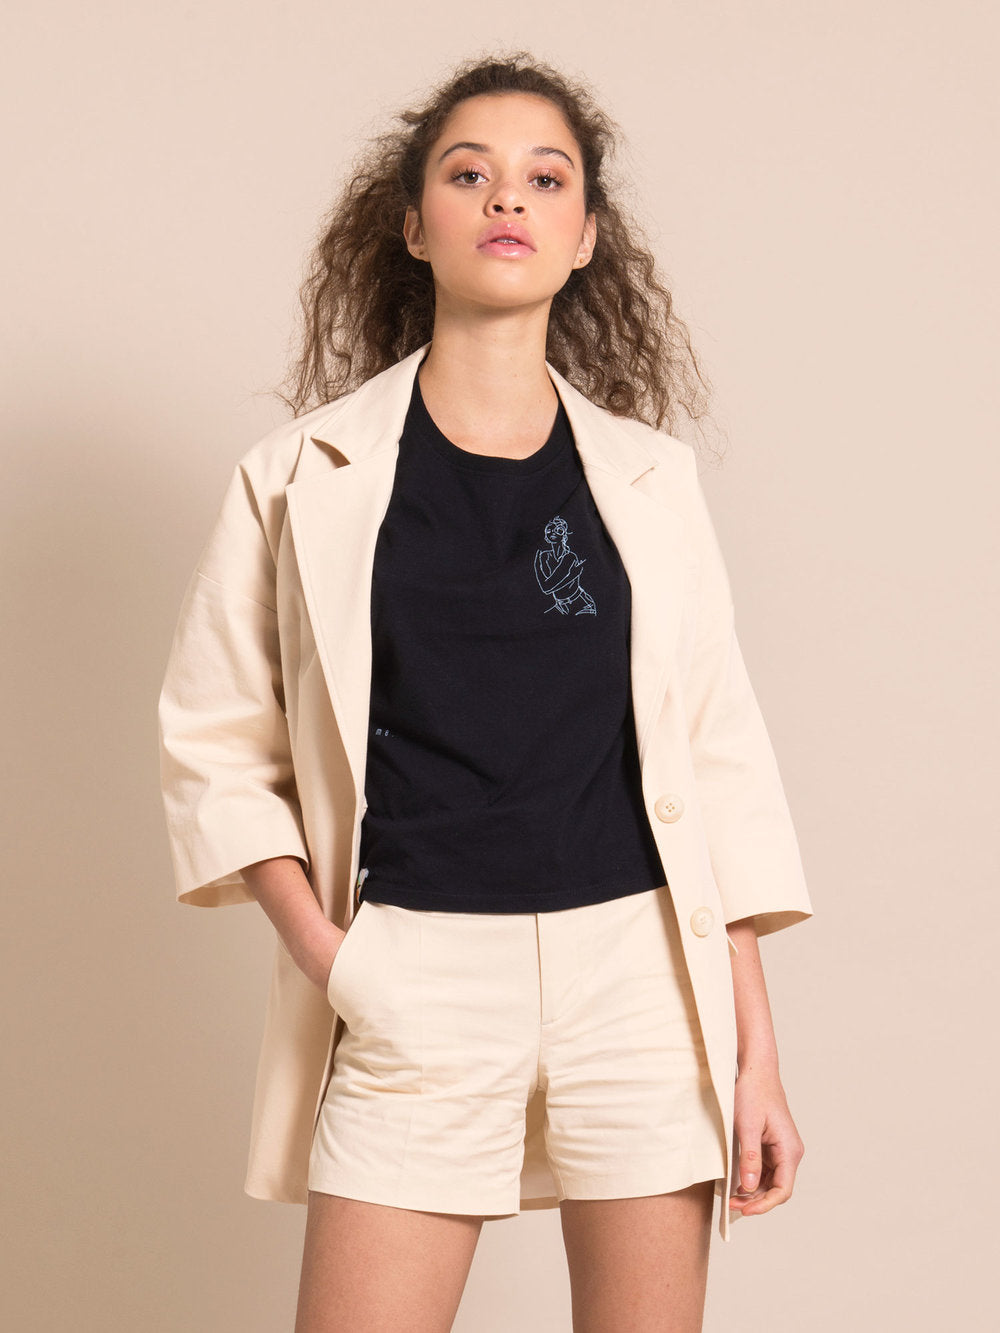 Woman wearing a sustianable black tee, beige shorts and beige long vblazer with bell sleeves